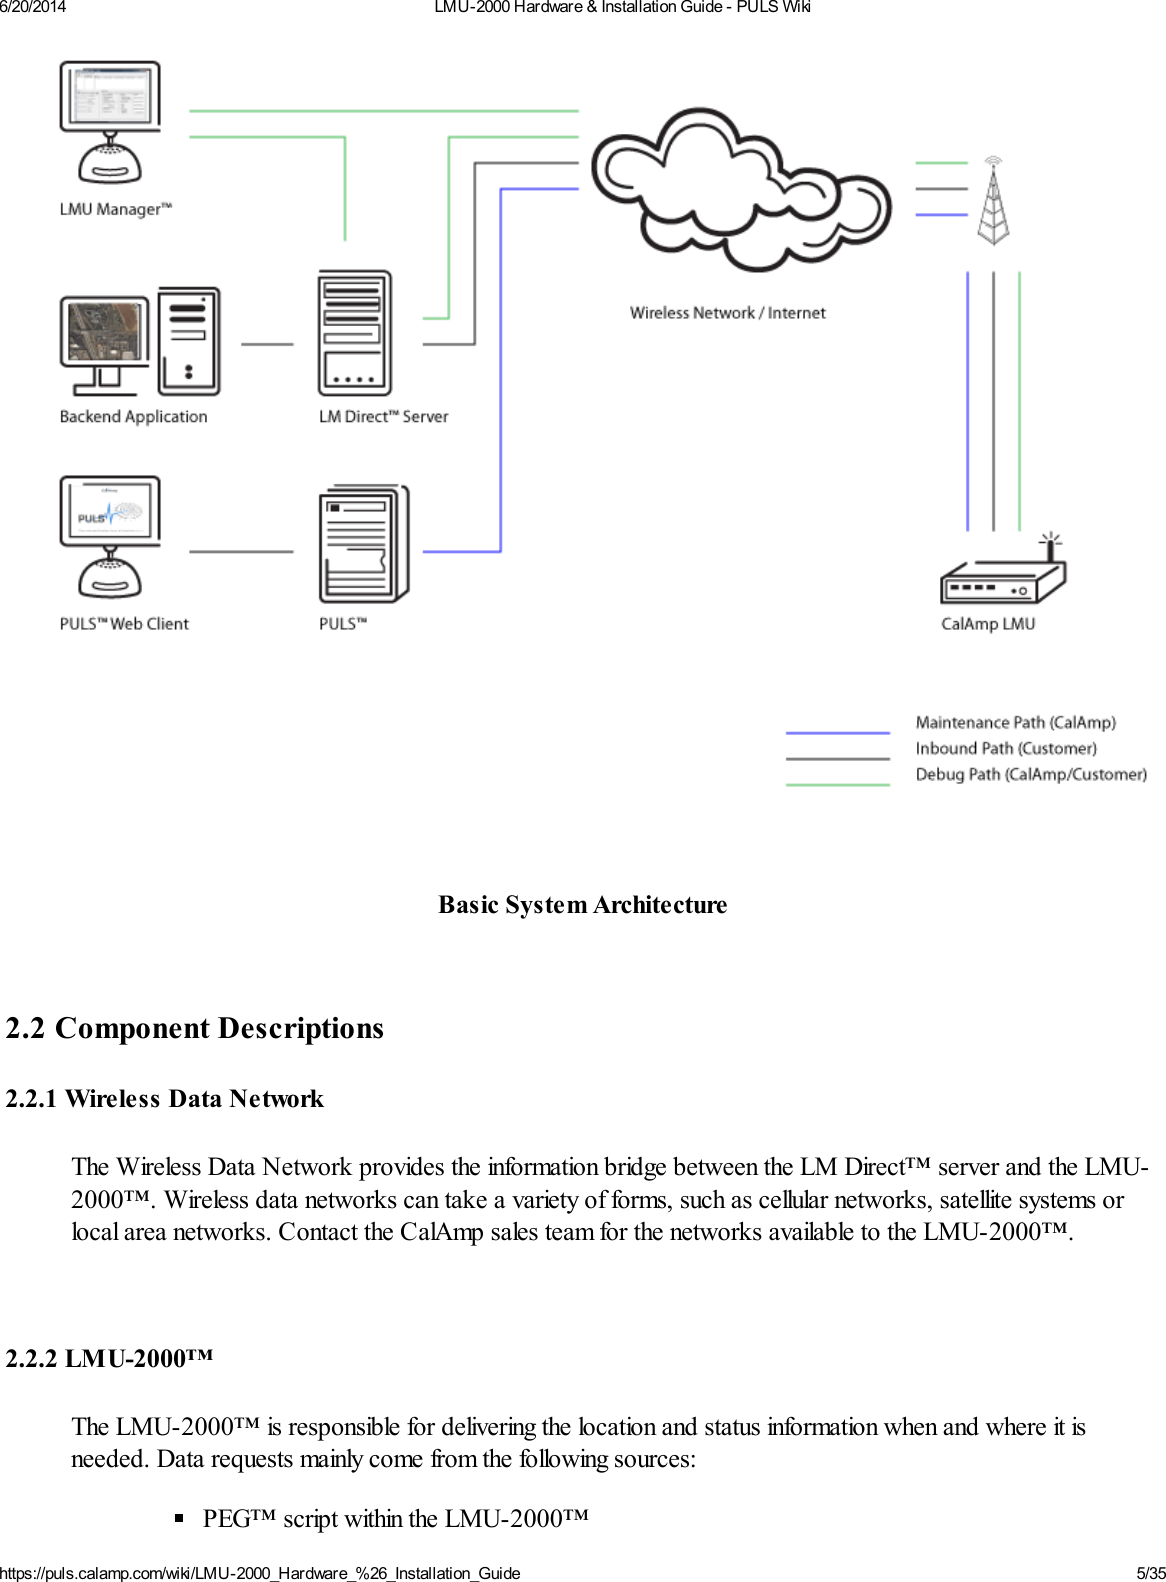 6/20/2014 LMU-2000 Hardware &amp; Installation Guide - PULS Wikihttps://puls.calamp.com/wiki/LMU-2000_Hardware_%26_Installation_Guide 5/35Basic System Architecture2.2 Component Descriptions2.2.1 Wireless Data NetworkThe Wireless Data Network provides the information bridge between the LM Direct™ server and the LMU-2000™. Wireless data networks can take a variety of forms, such as cellular networks, satellite systems orlocal area networks. Contact the CalAmp sales team for the networks available to the LMU-2000™.2.2.2 LMU-2000™The LMU-2000™ is responsible for delivering the location and status information when and where it isneeded. Data requests mainly come from the following sources:PEG™ script within the LMU-2000™